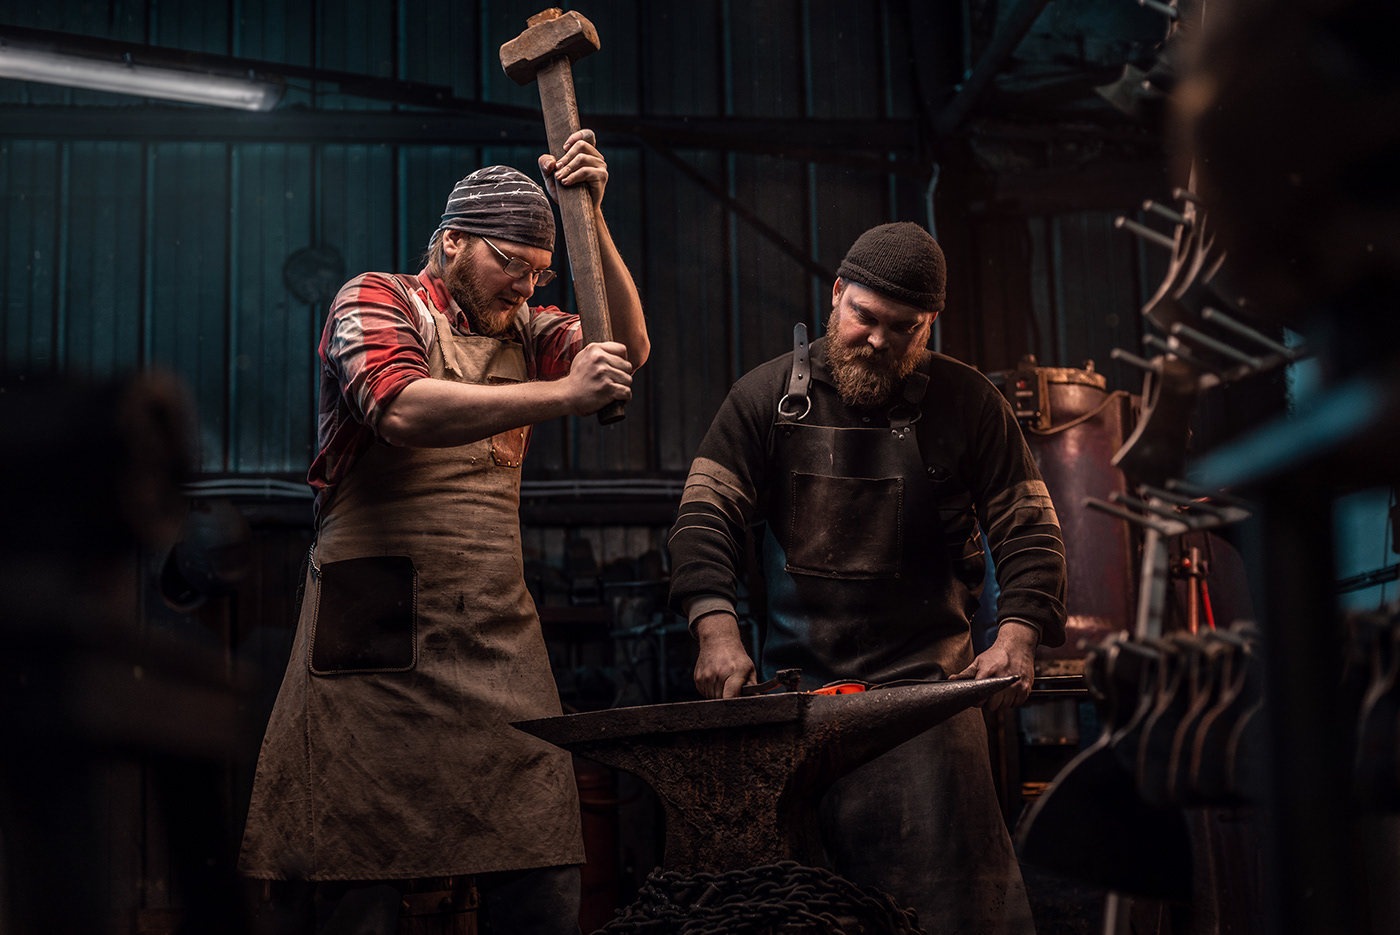 smithy iron fire man Production portrait hands leather manufacture axe